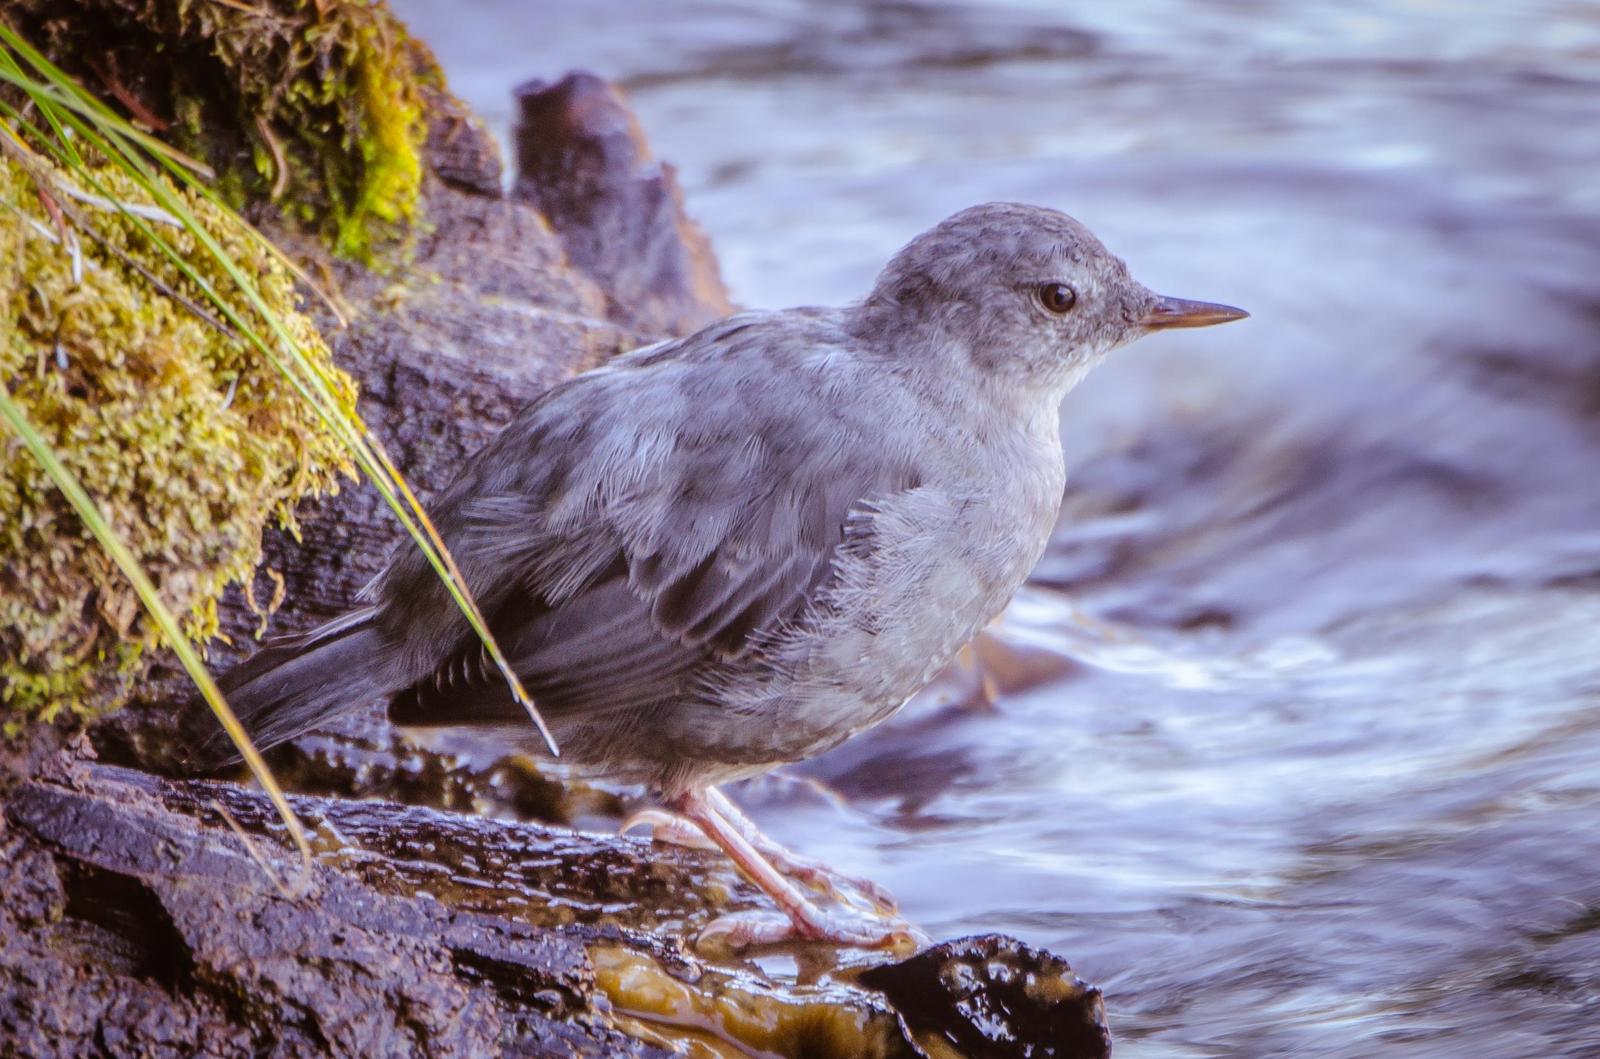 American Dipper Photo by Scott Yerges